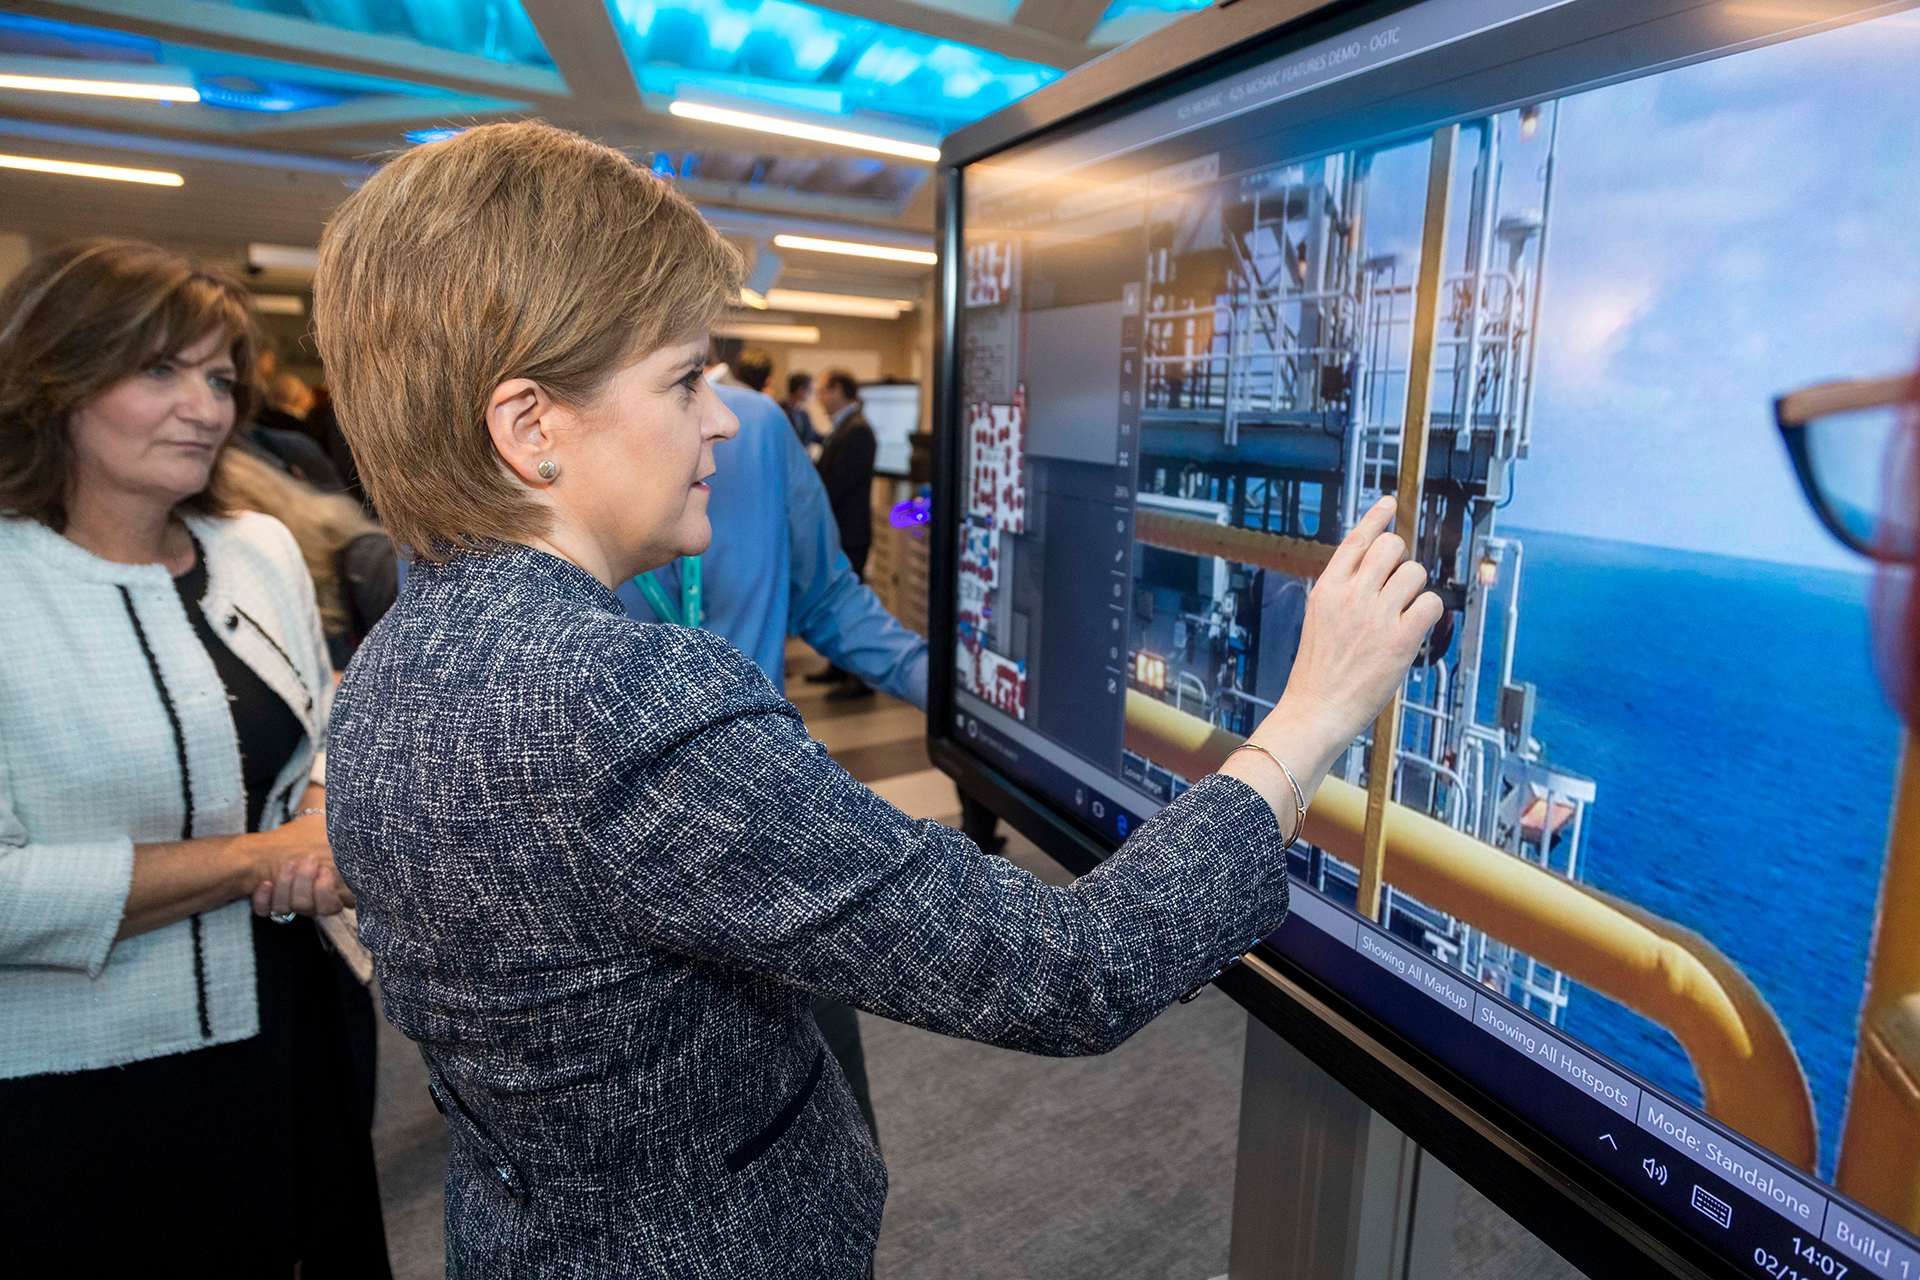 Forward-looking. Nicola Sturgeon, Scotland’s first minister, looks into the future. (Photo: Oil & Gas Technology Centre)